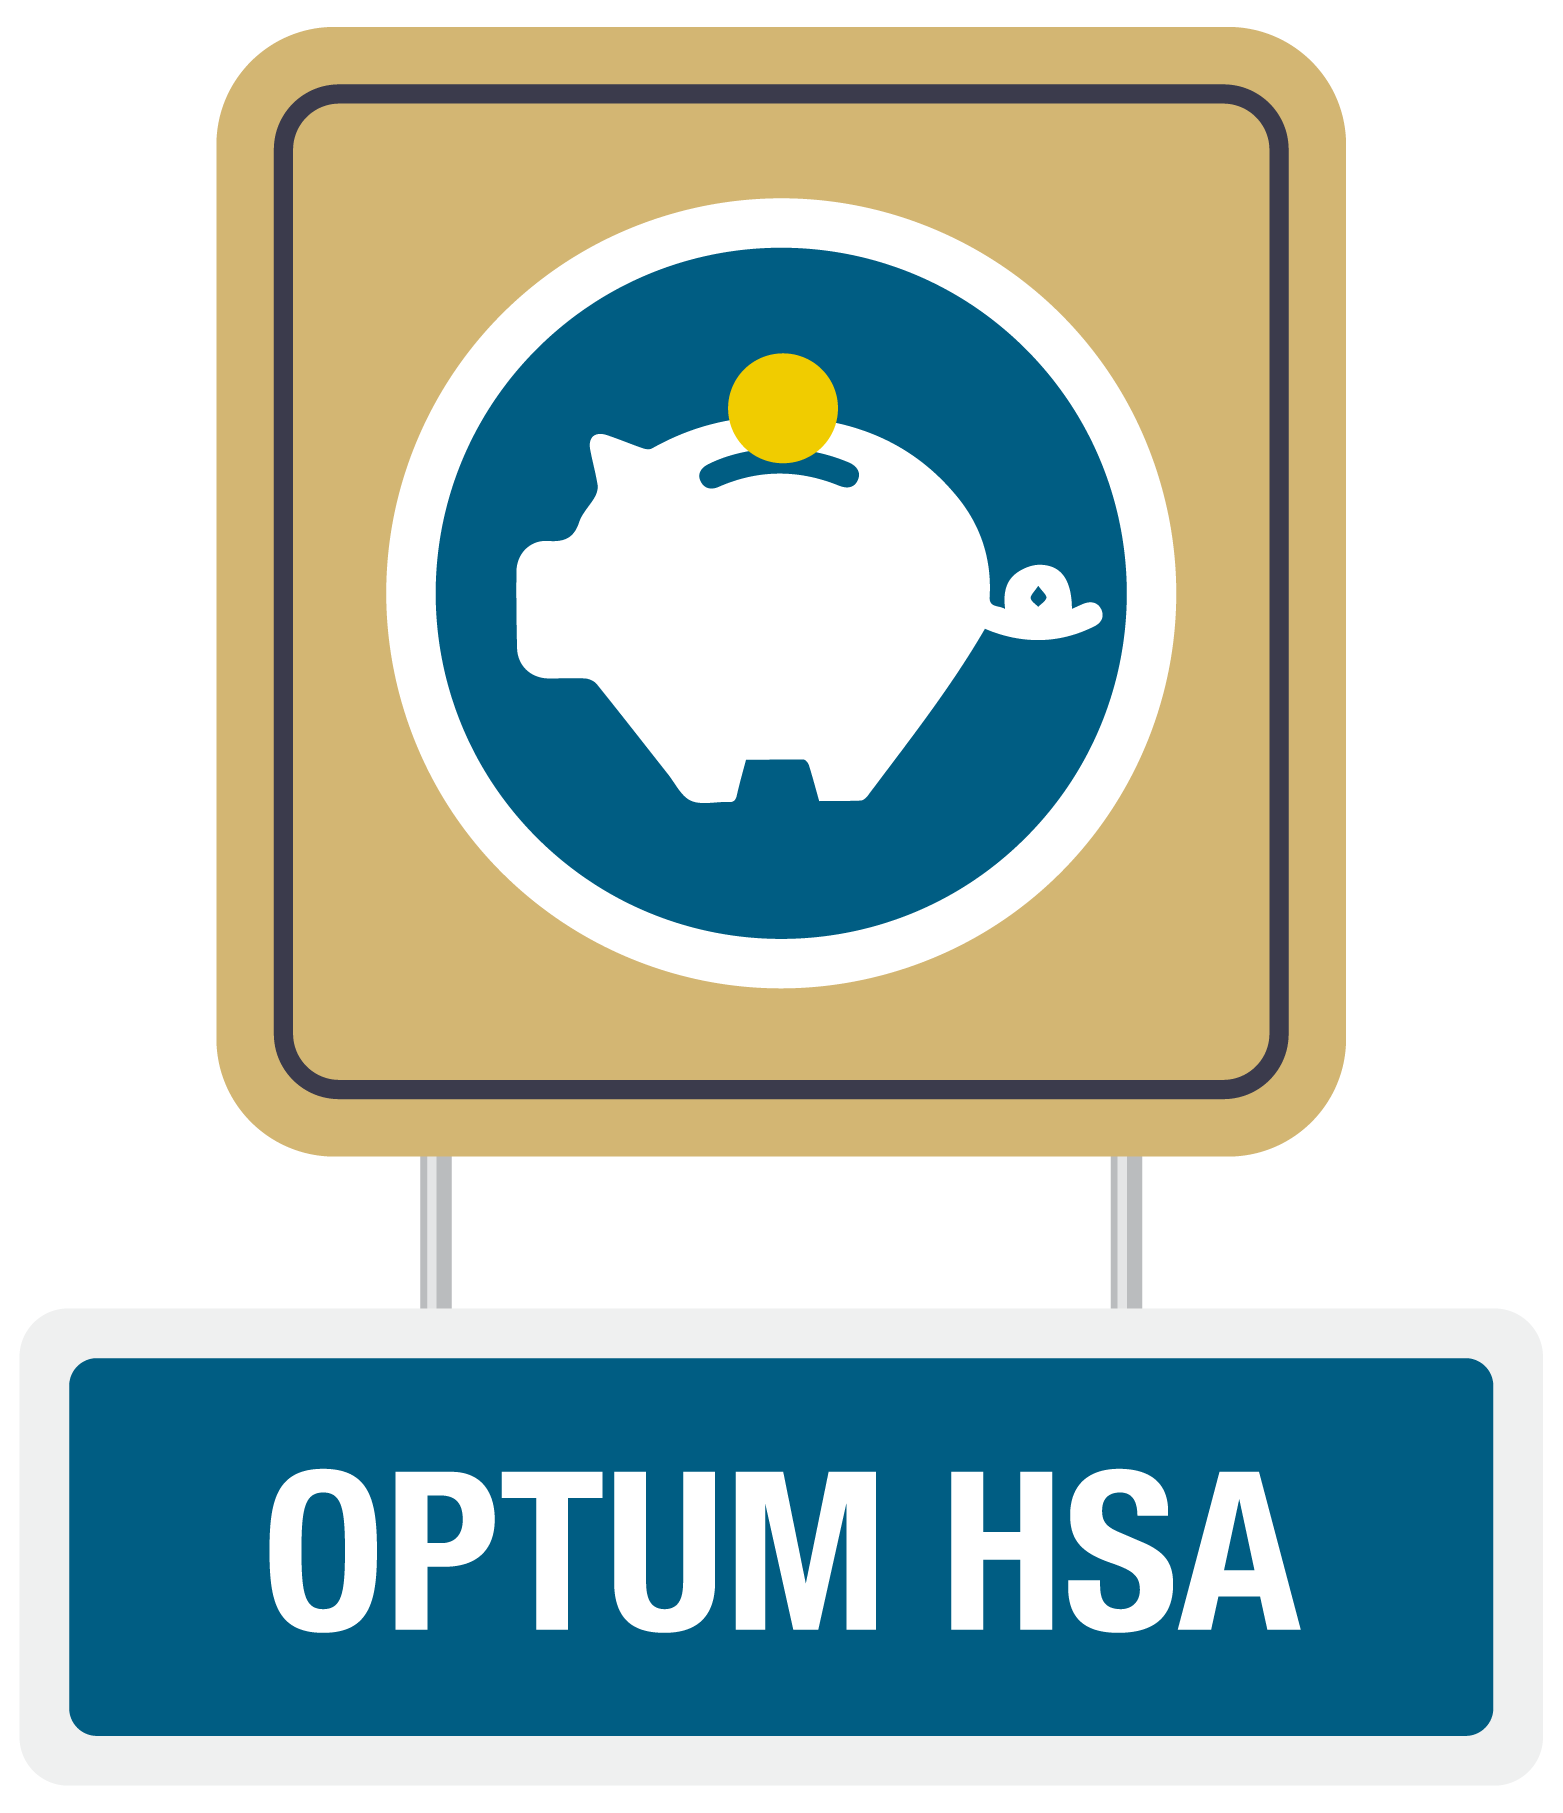 Optum HSA fair page - click to access